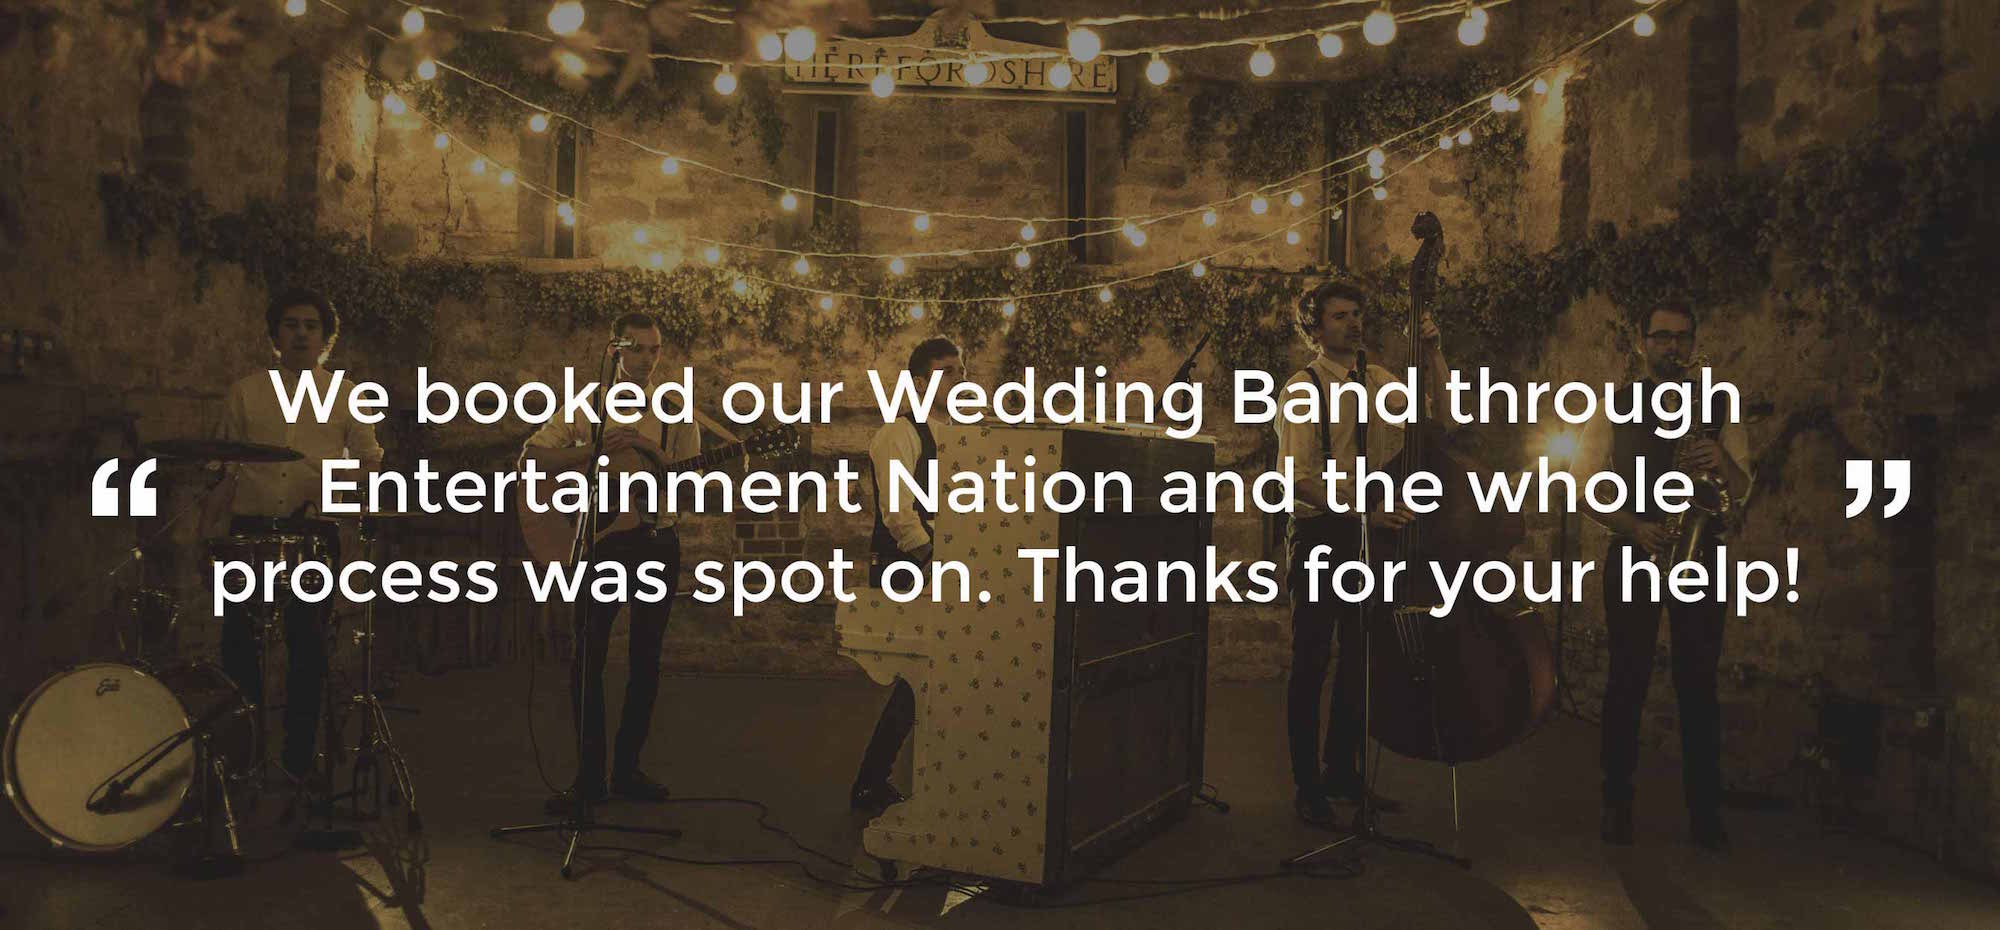 Review of Wedding Band Sheffield